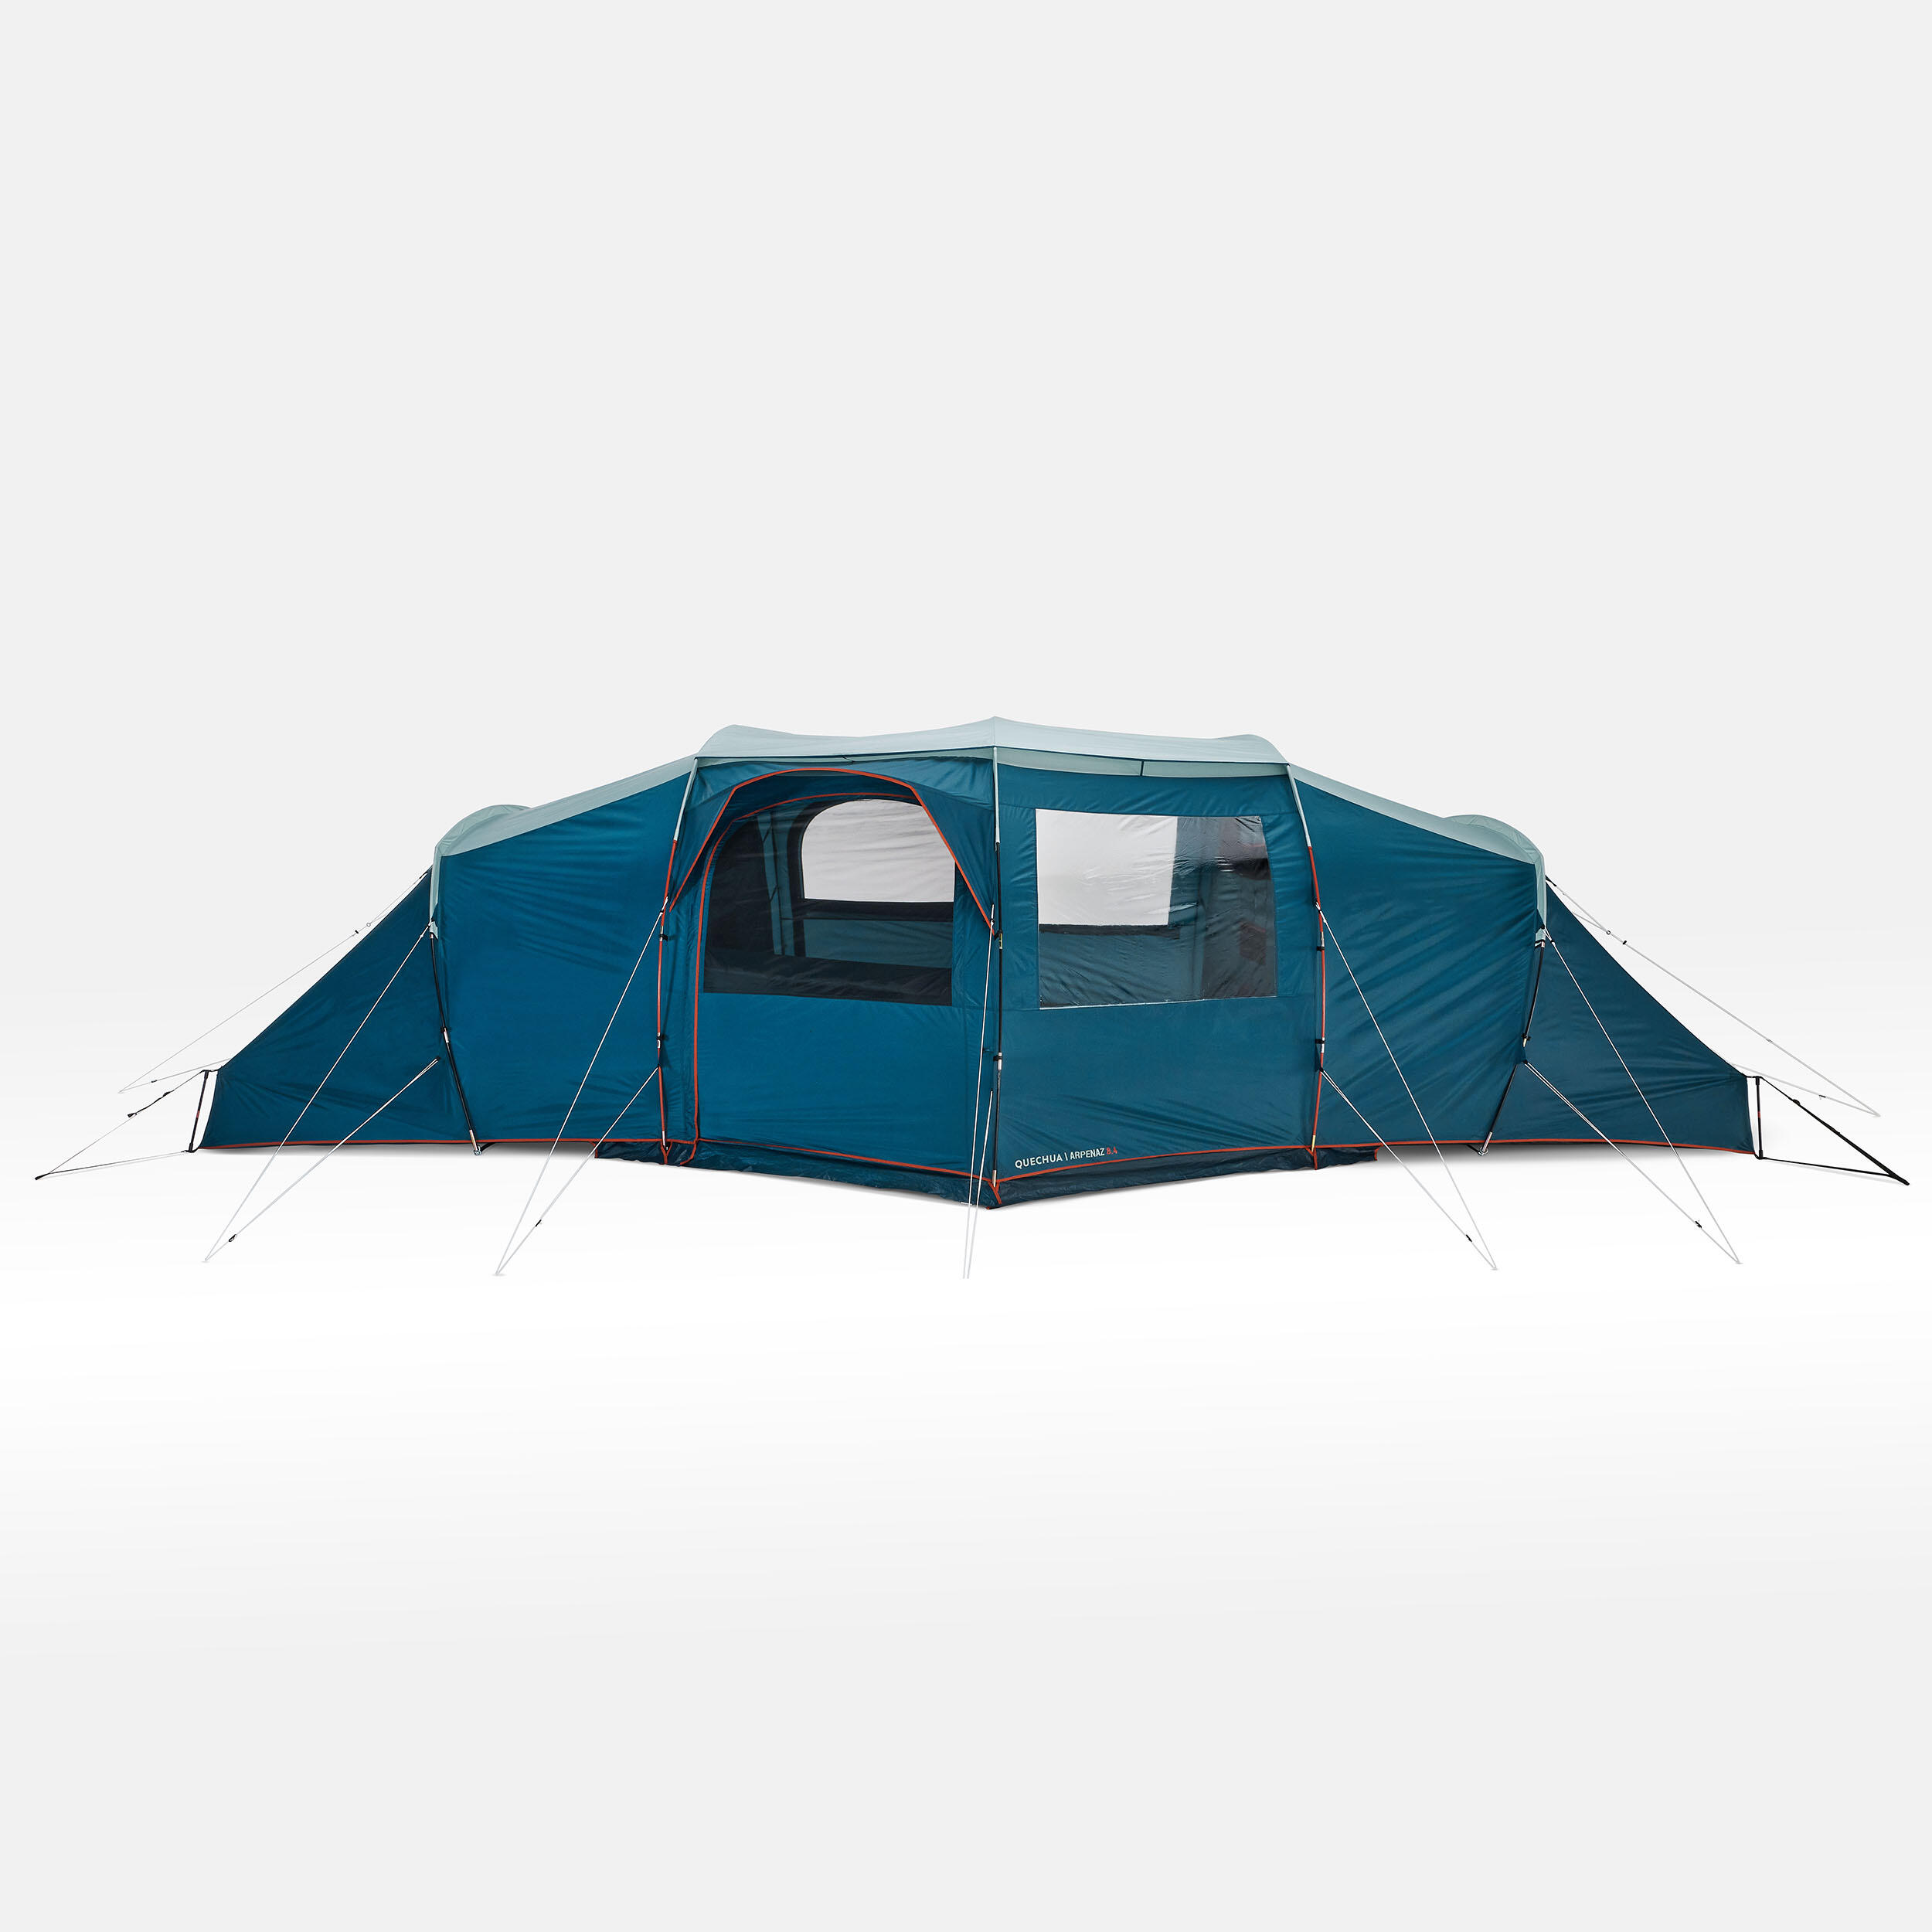 8 Man Tent With Poles - Arpenaz 8.4 10/33